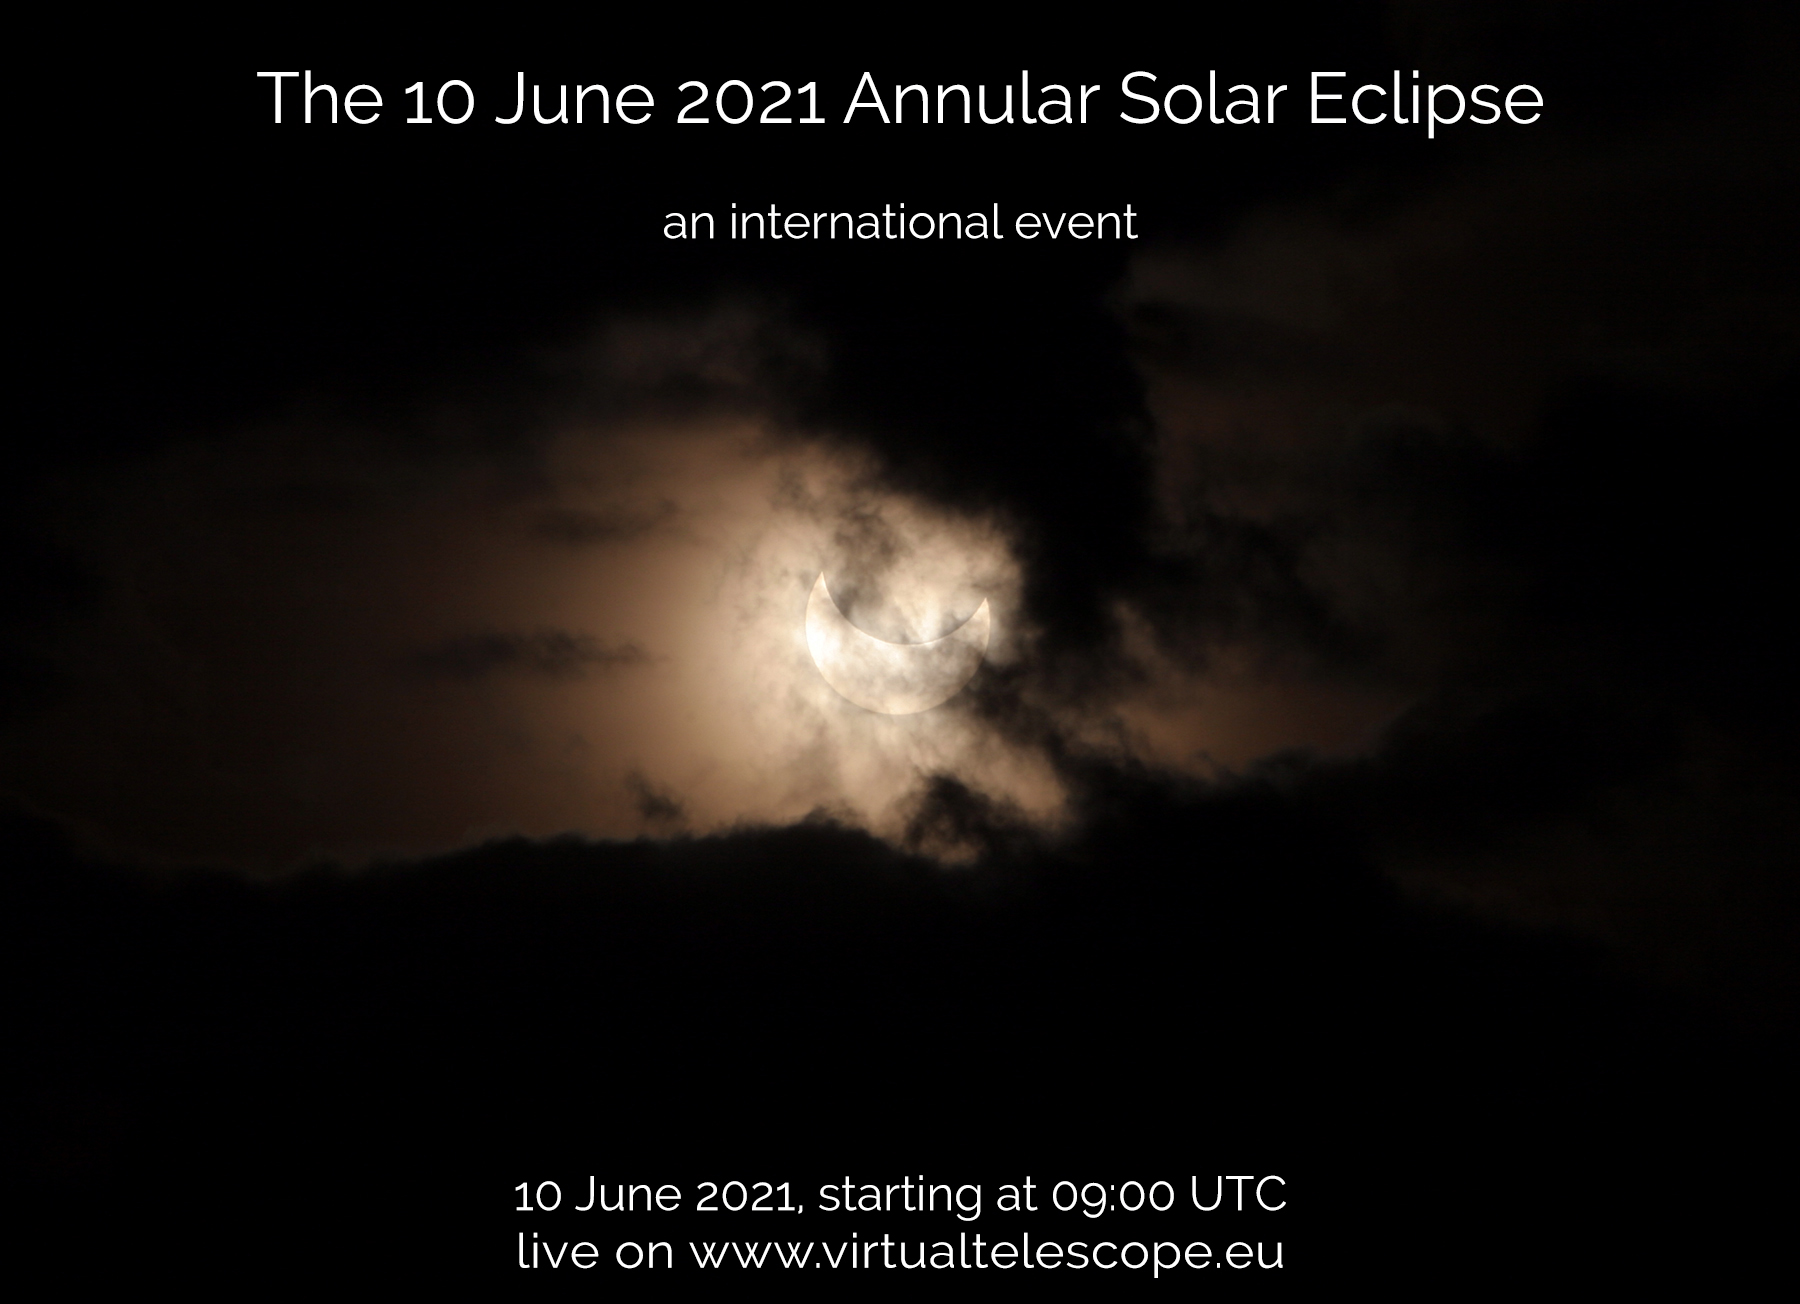 “10 June 2021 Annular Solar Eclipse" - poster of the event